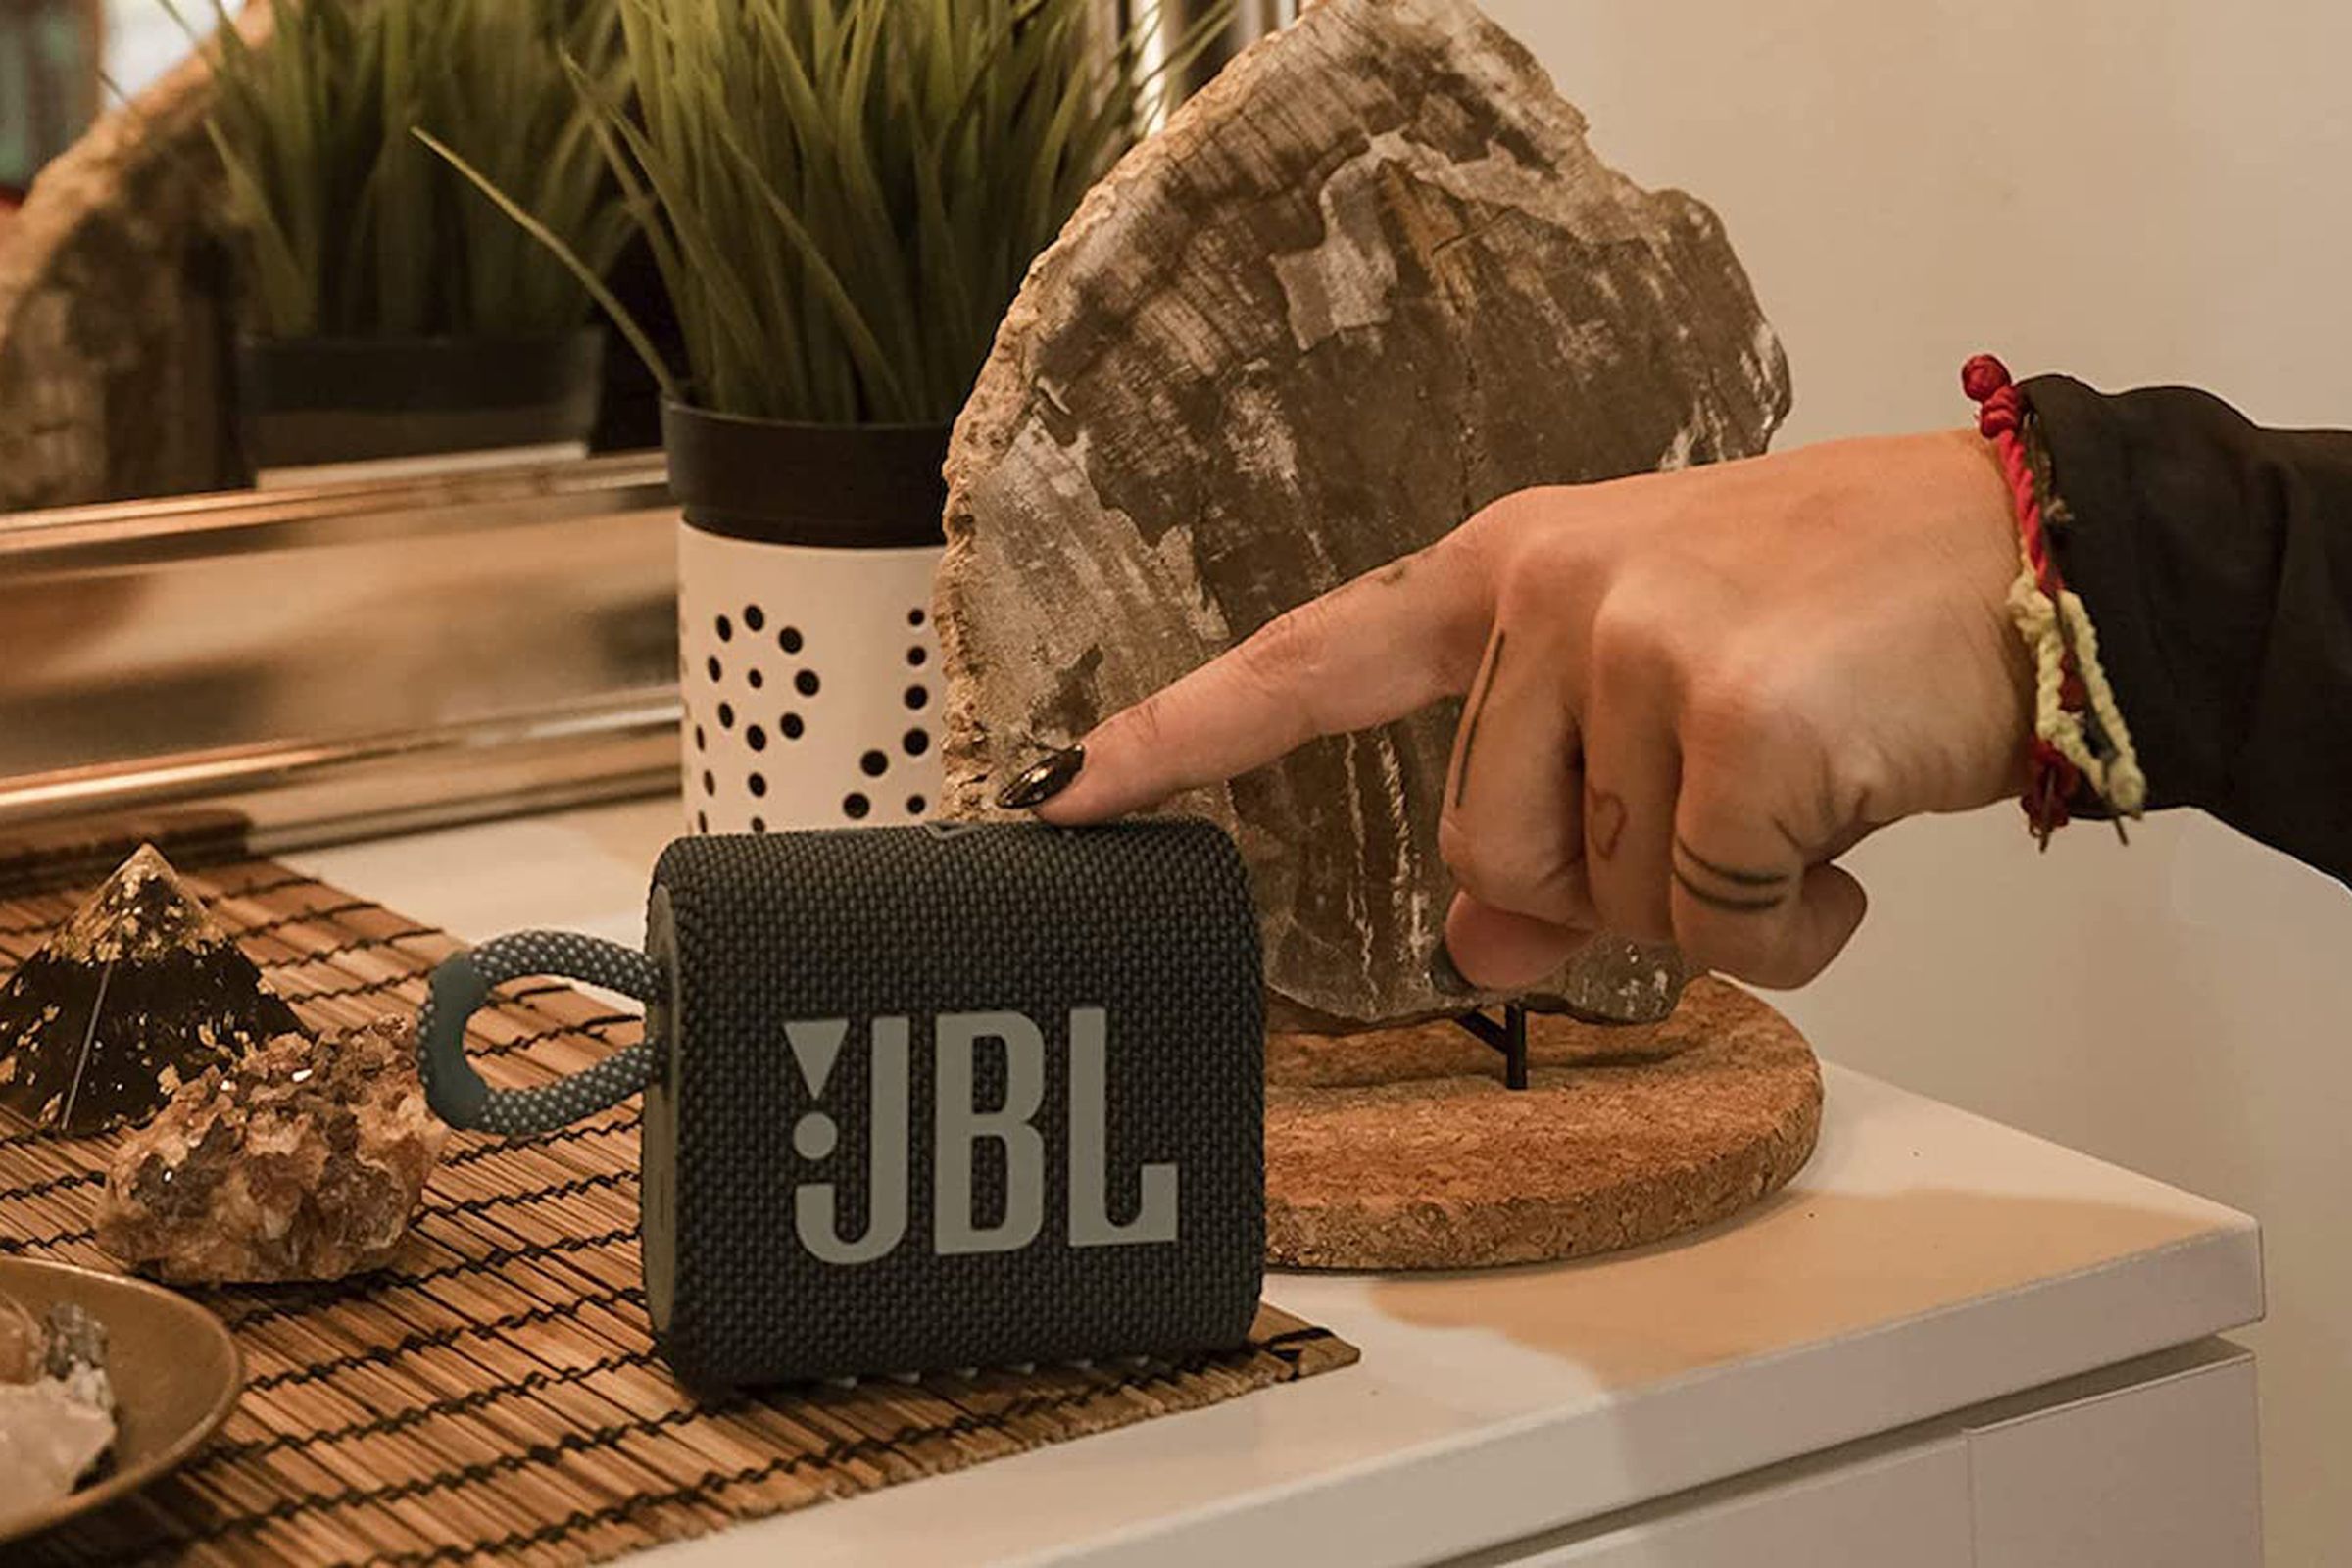 The JBL Go 3 is a compact waterproof speaker that makes for a fun gift.